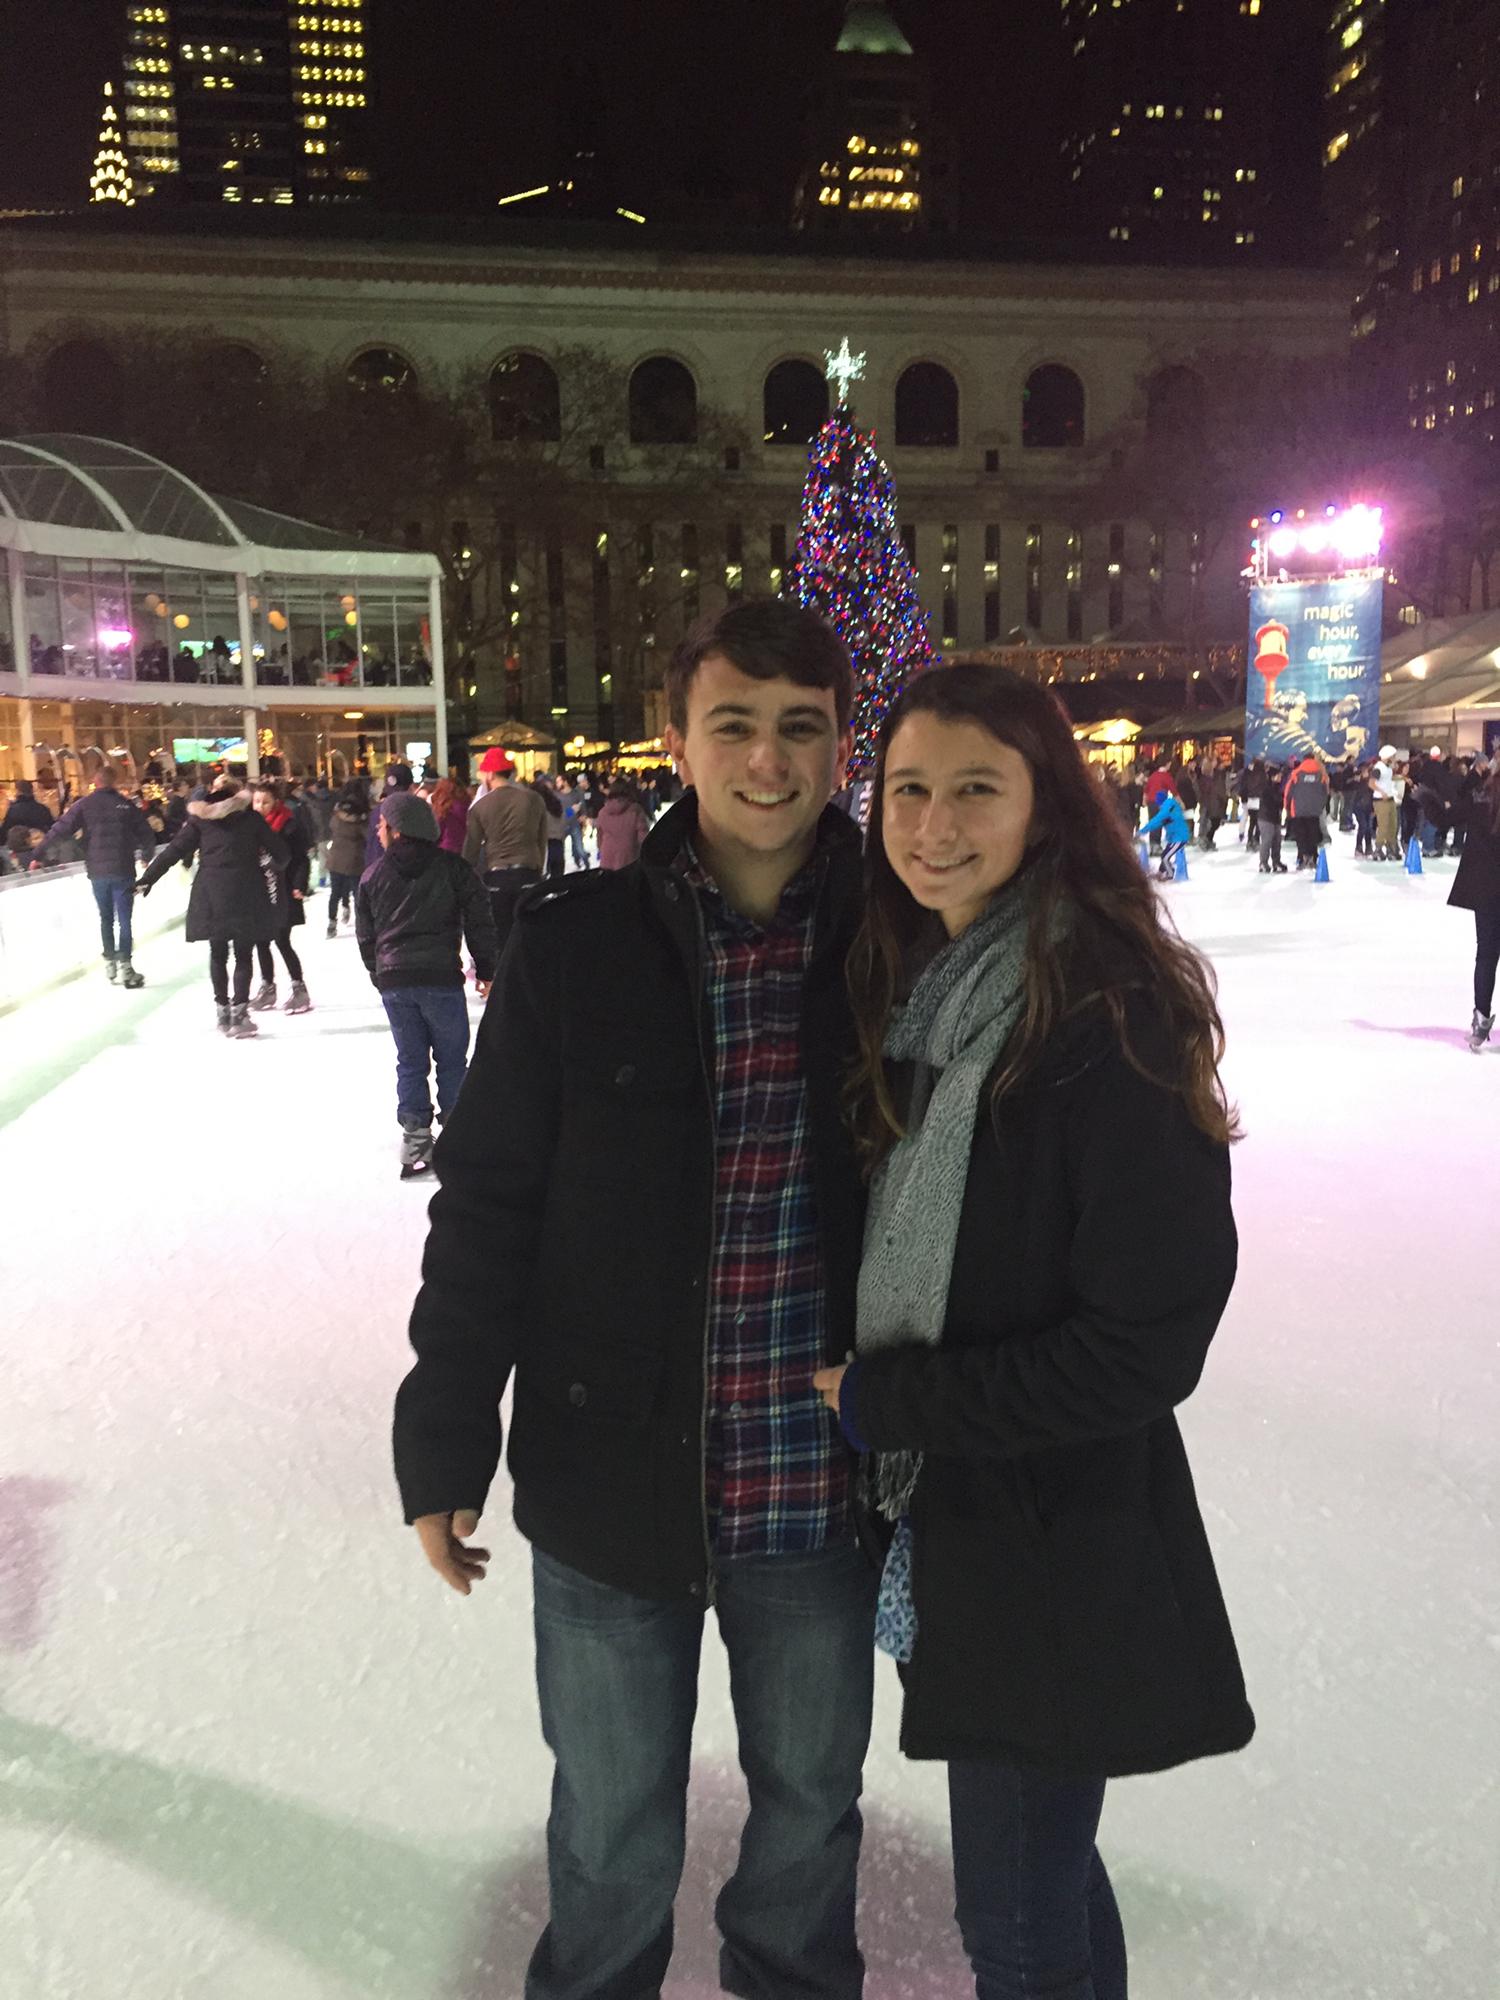 One of many ice skating date nights in Bryant Park - happened several times every year of college and beyond.